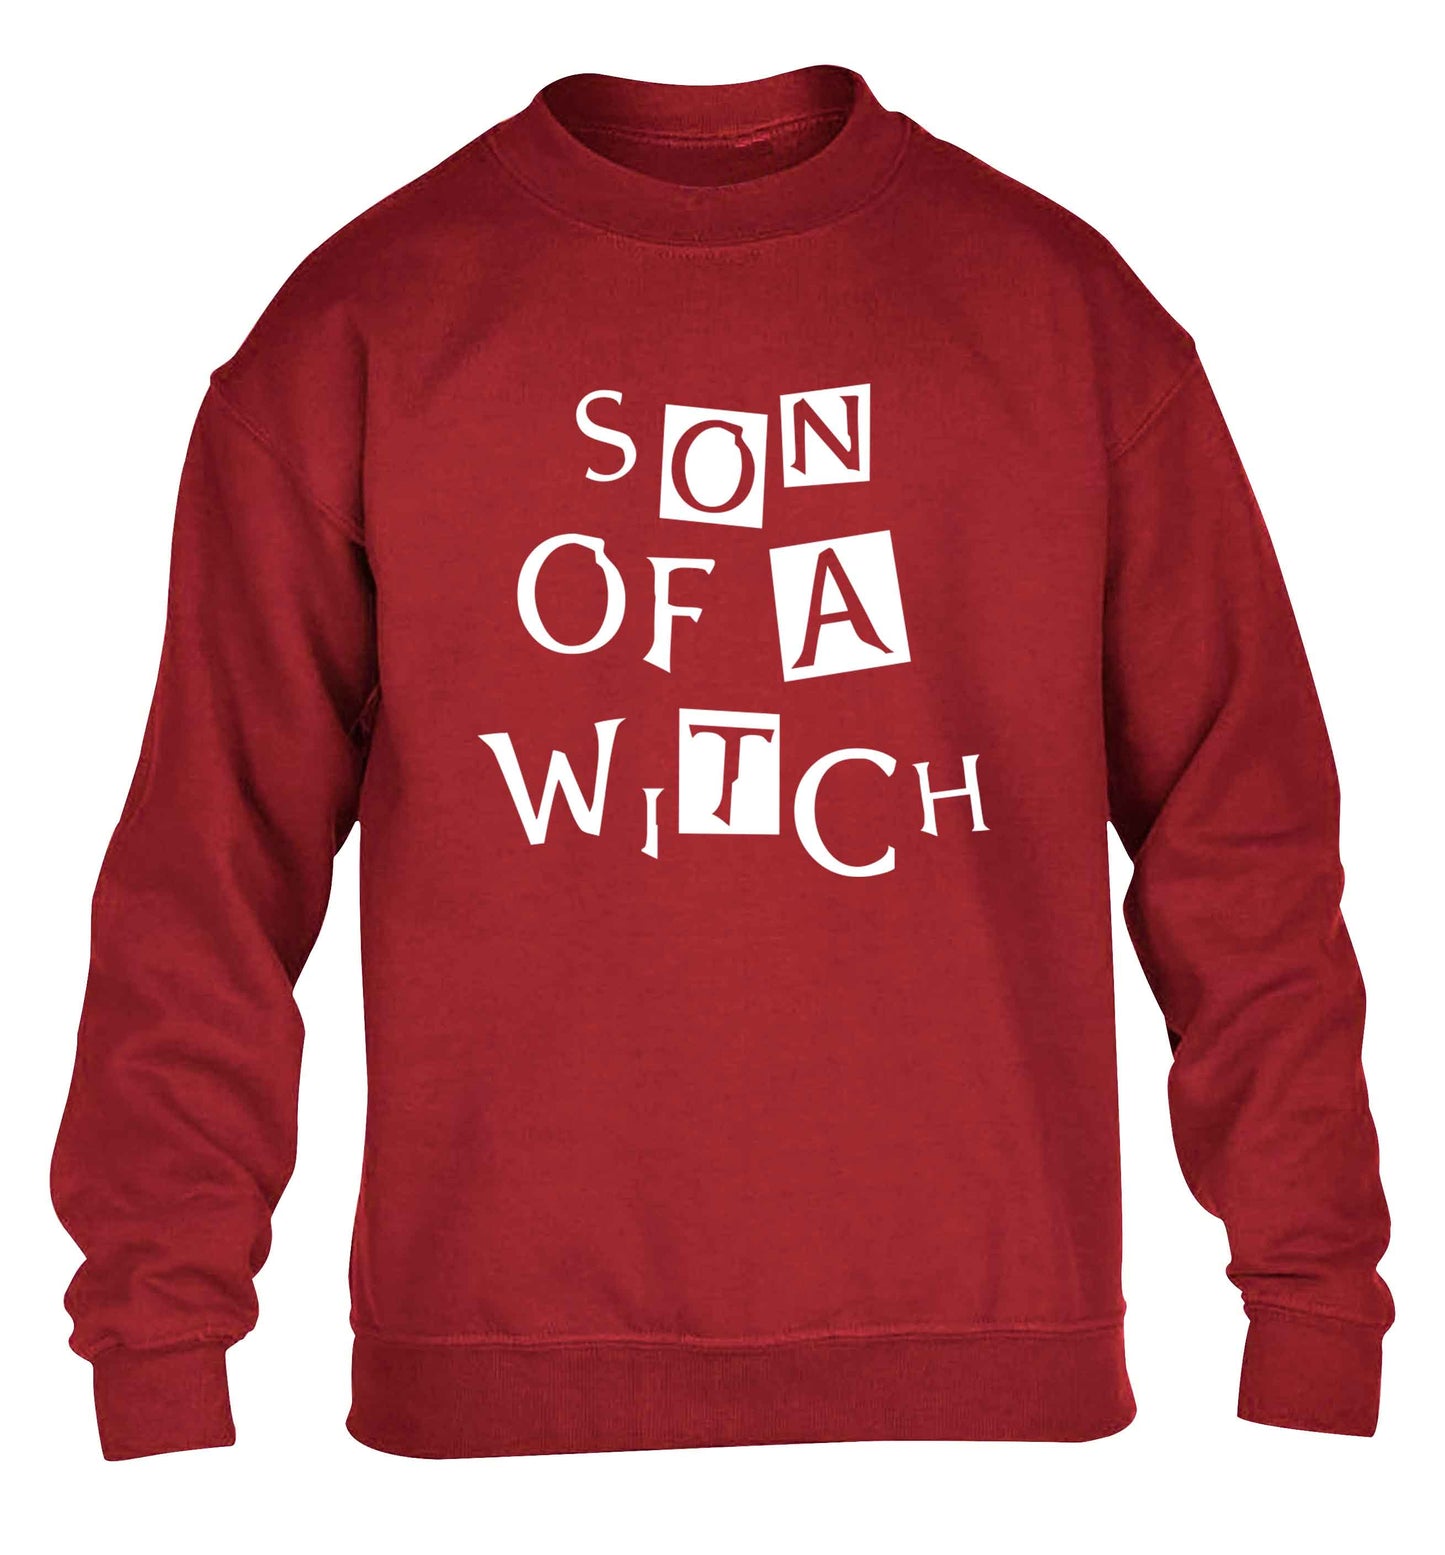 Son of a witch children's grey sweater 12-13 Years